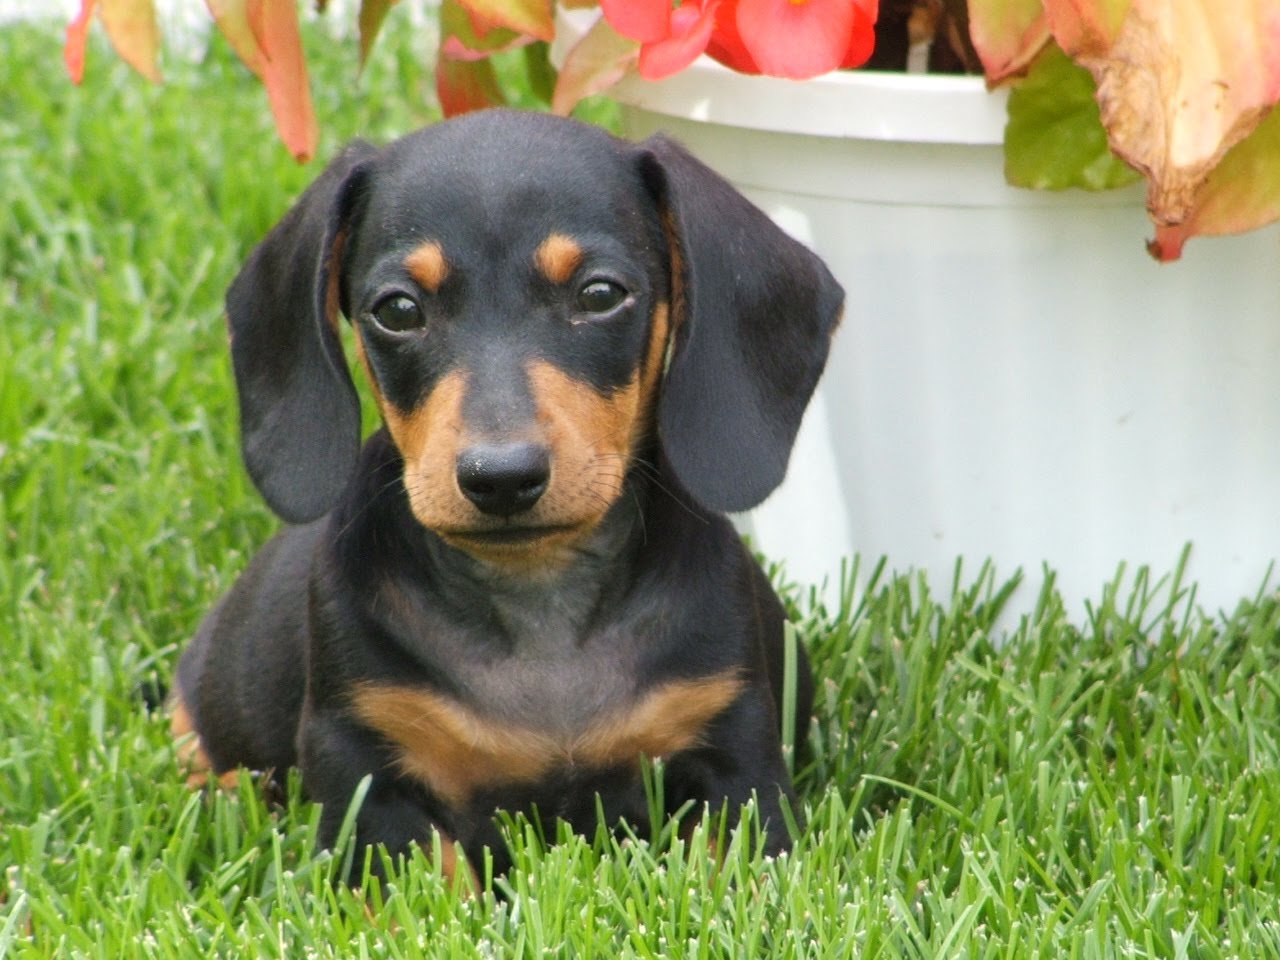 All List Of Different Dogs Breeds: Dachshund Dog - Small ...